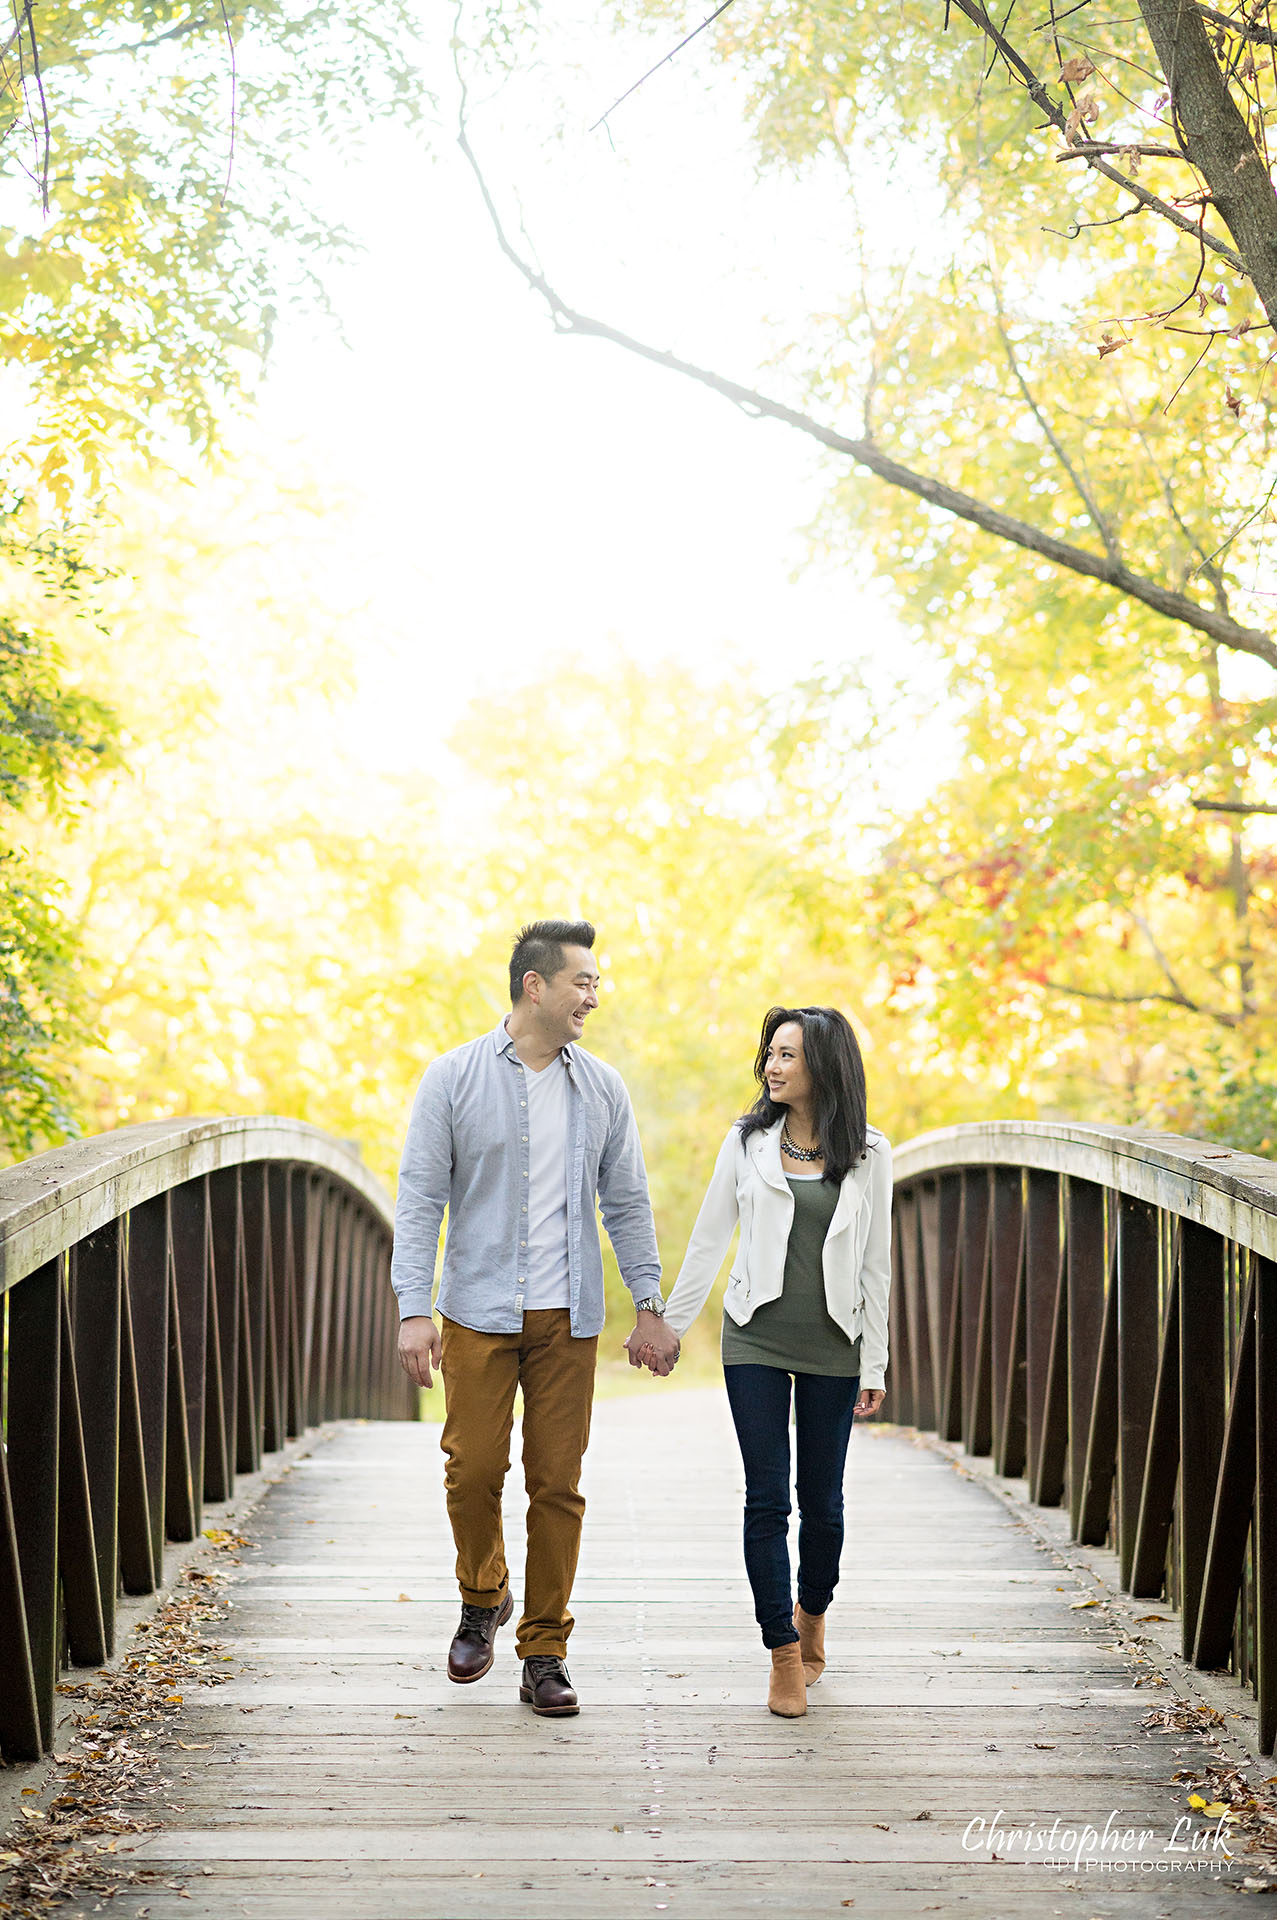 Mother Father Husband Wife Holding Hands Walking Together on Bridge Autumn Fall Leaves Markham Unionville Toronto Family Photographer